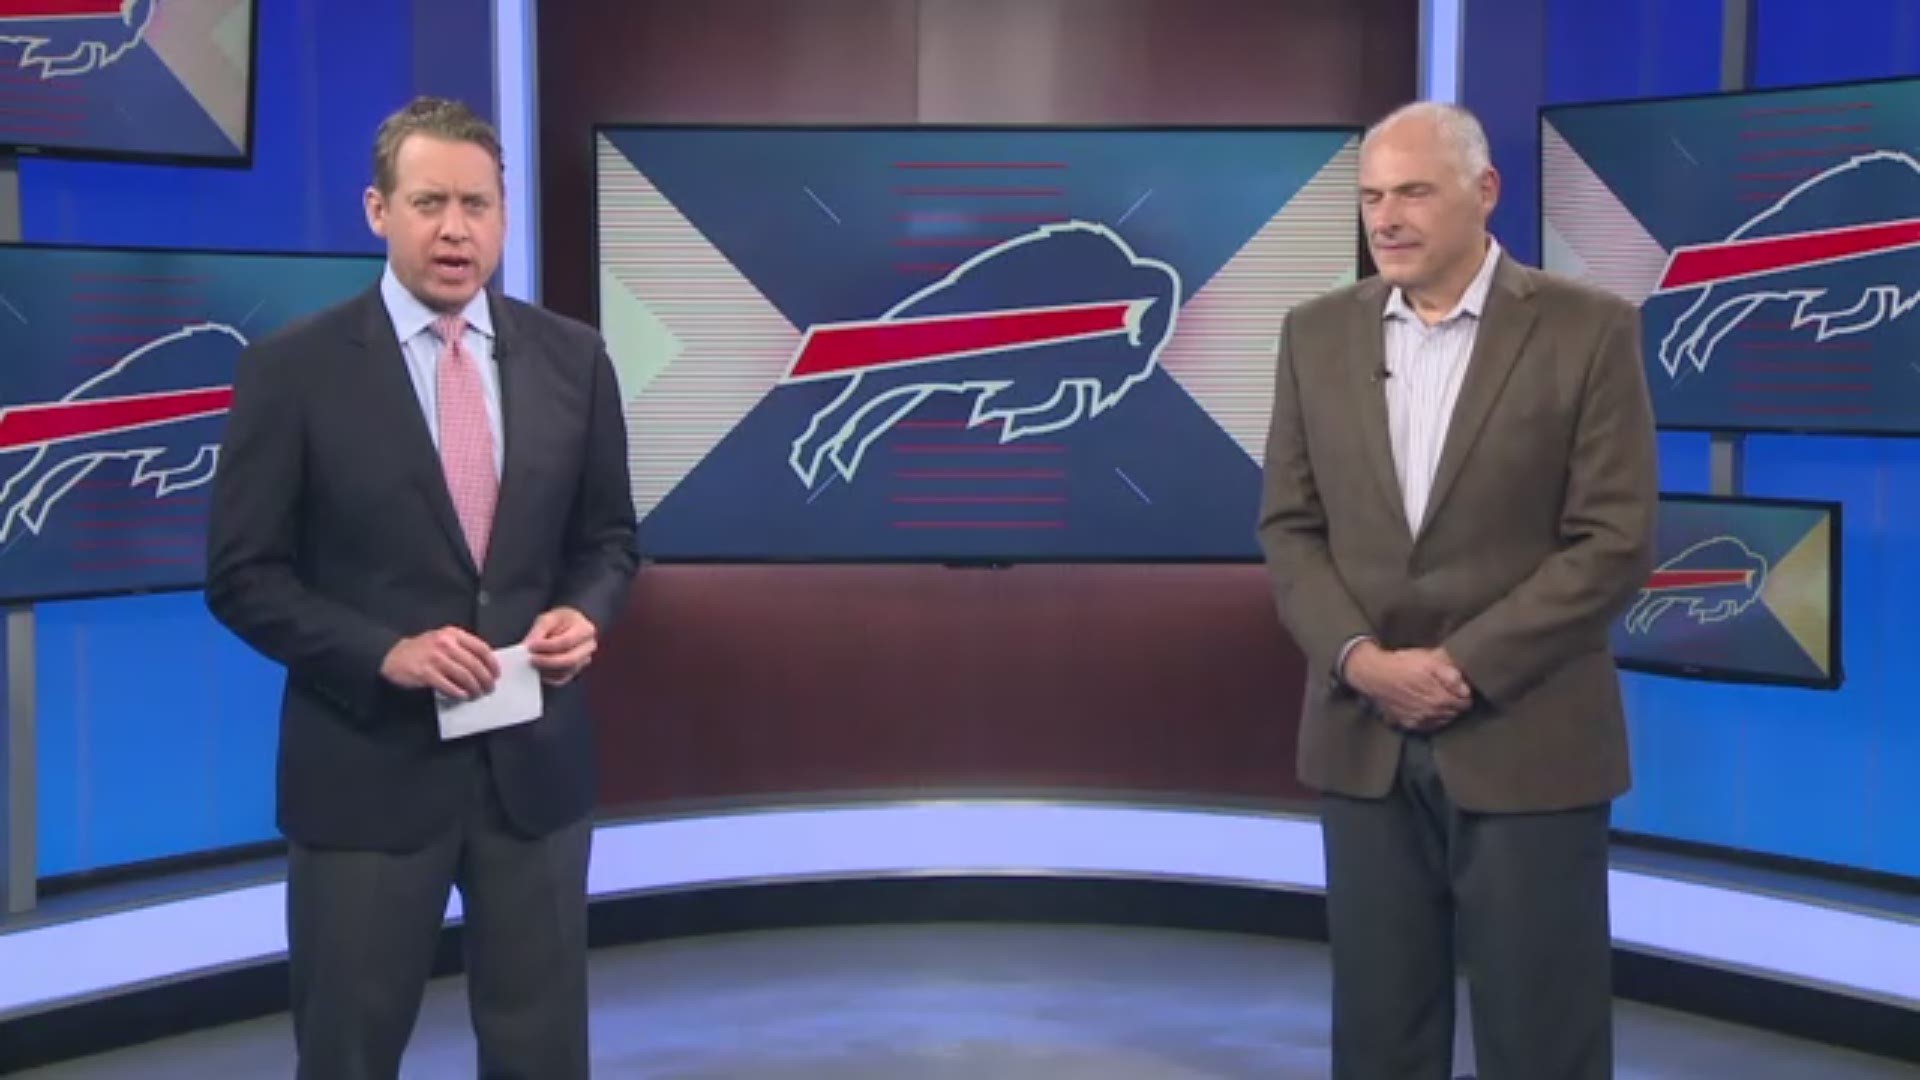 WGRZ's Adam Benigni and Vic Carucci of the Buffalo News discuss the quarterback situation and other aspects of the team as the Bills prepare for their home opener against the Chargers.